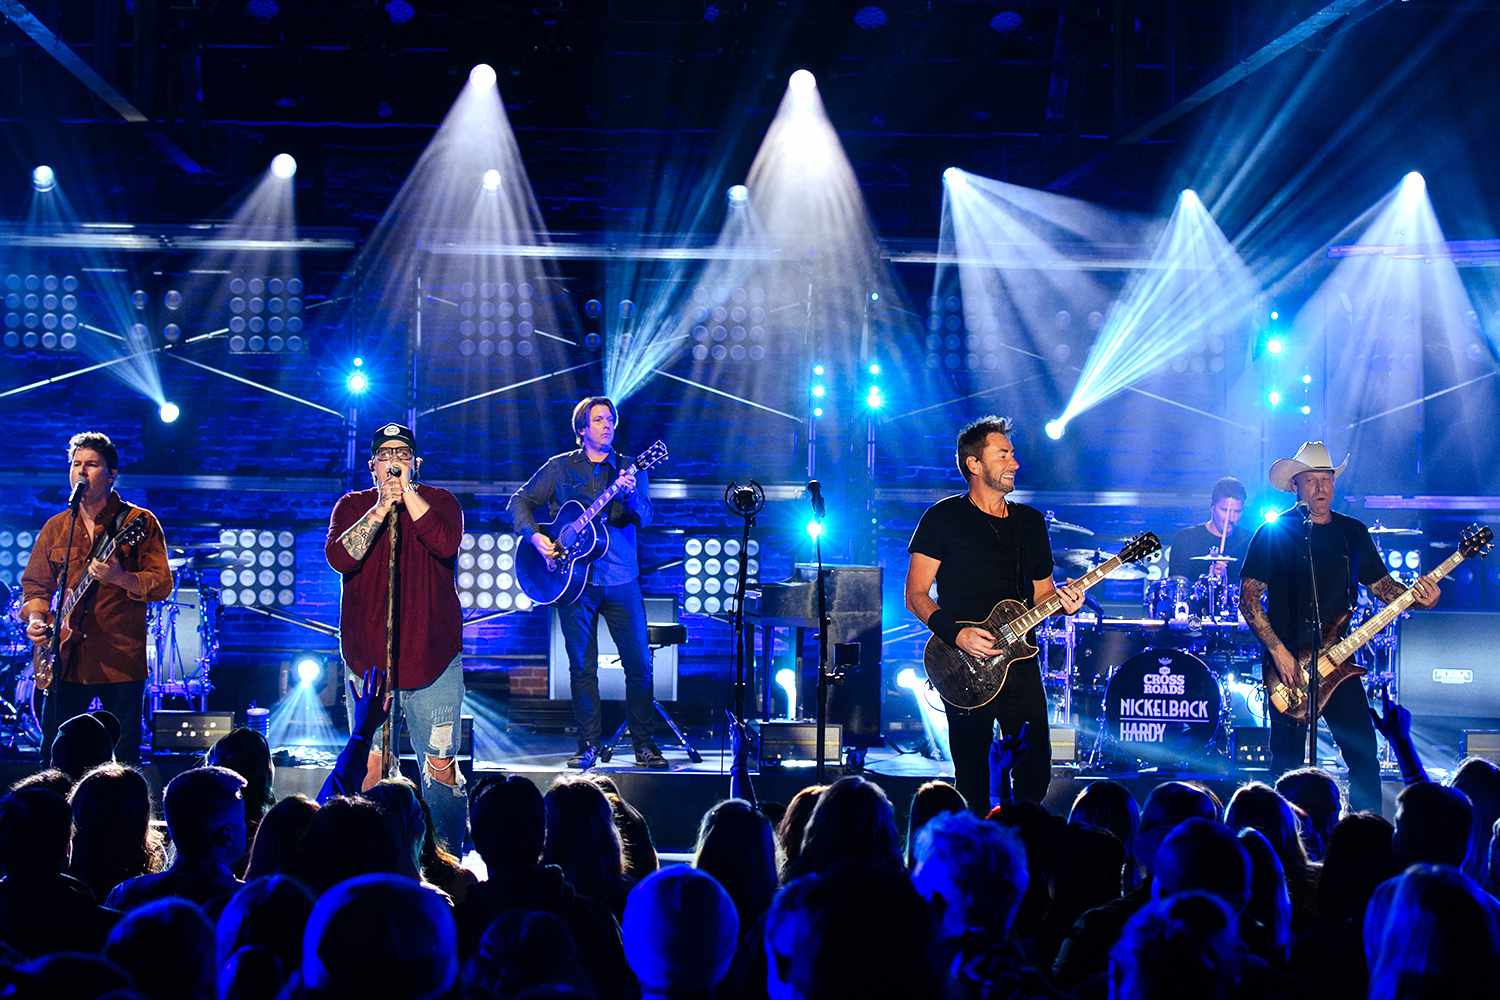 HARDY and Chad Kroeger of Nickelback perform at CMT Crossroads: Nickelback & HARDY at Marathon Music Works 